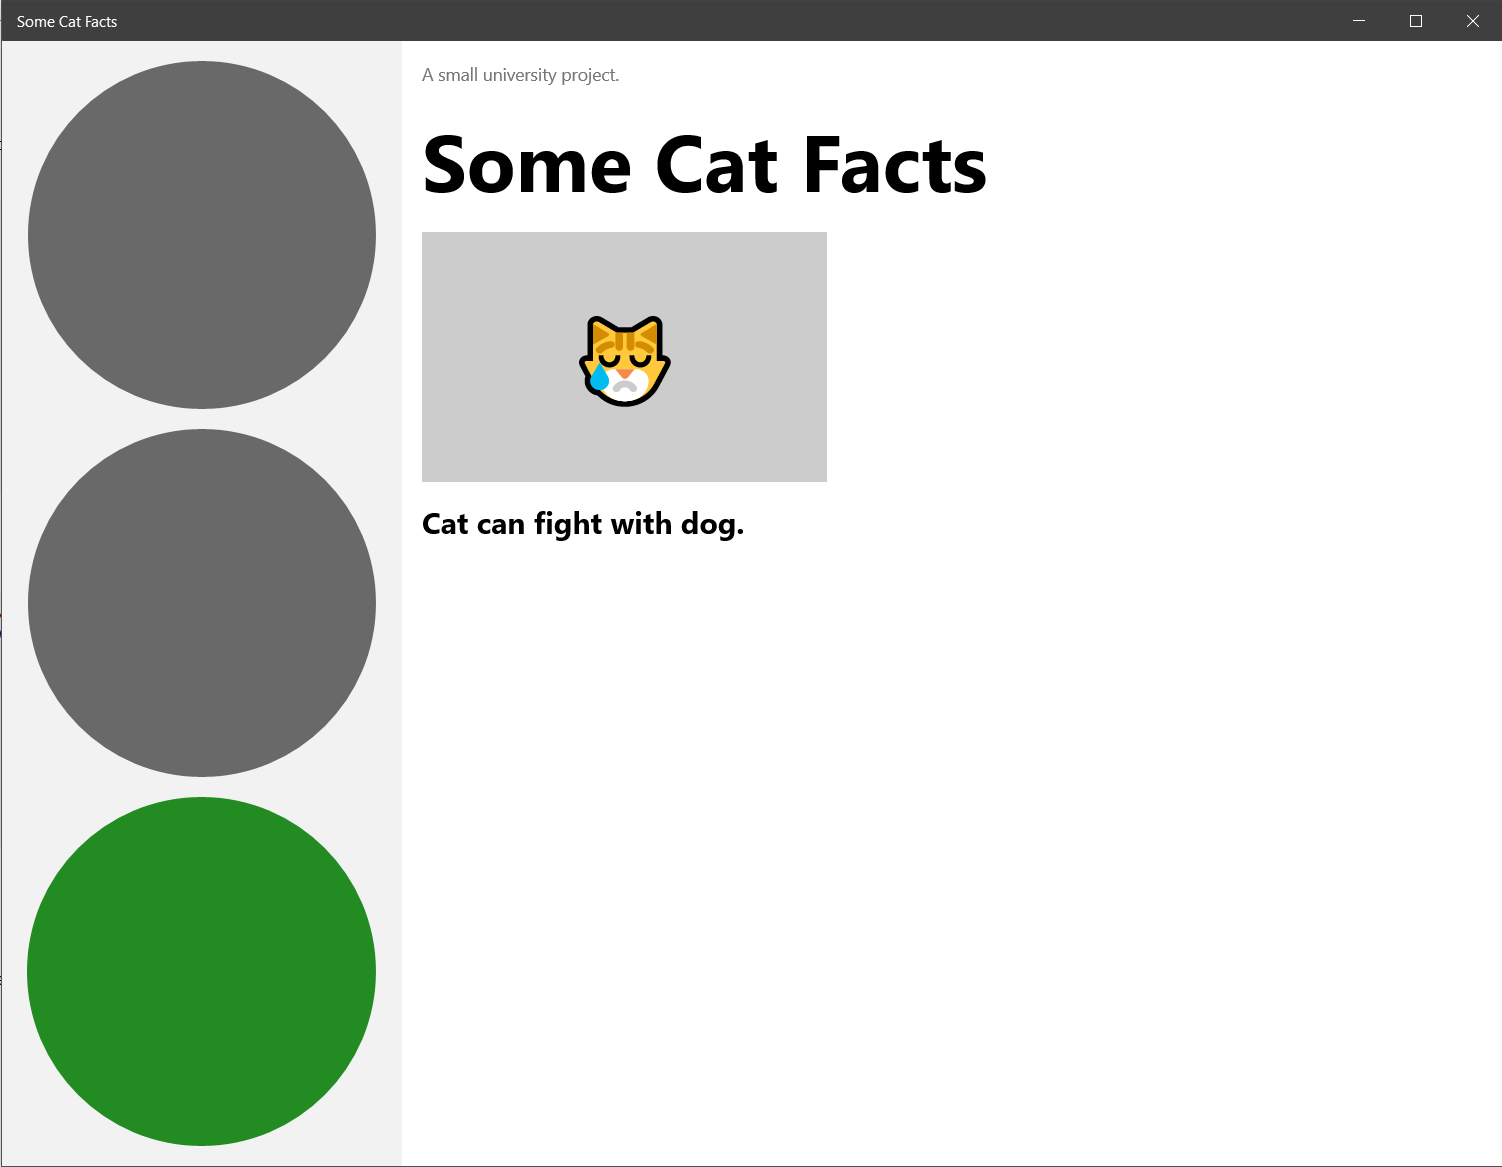 Some Cat Facts